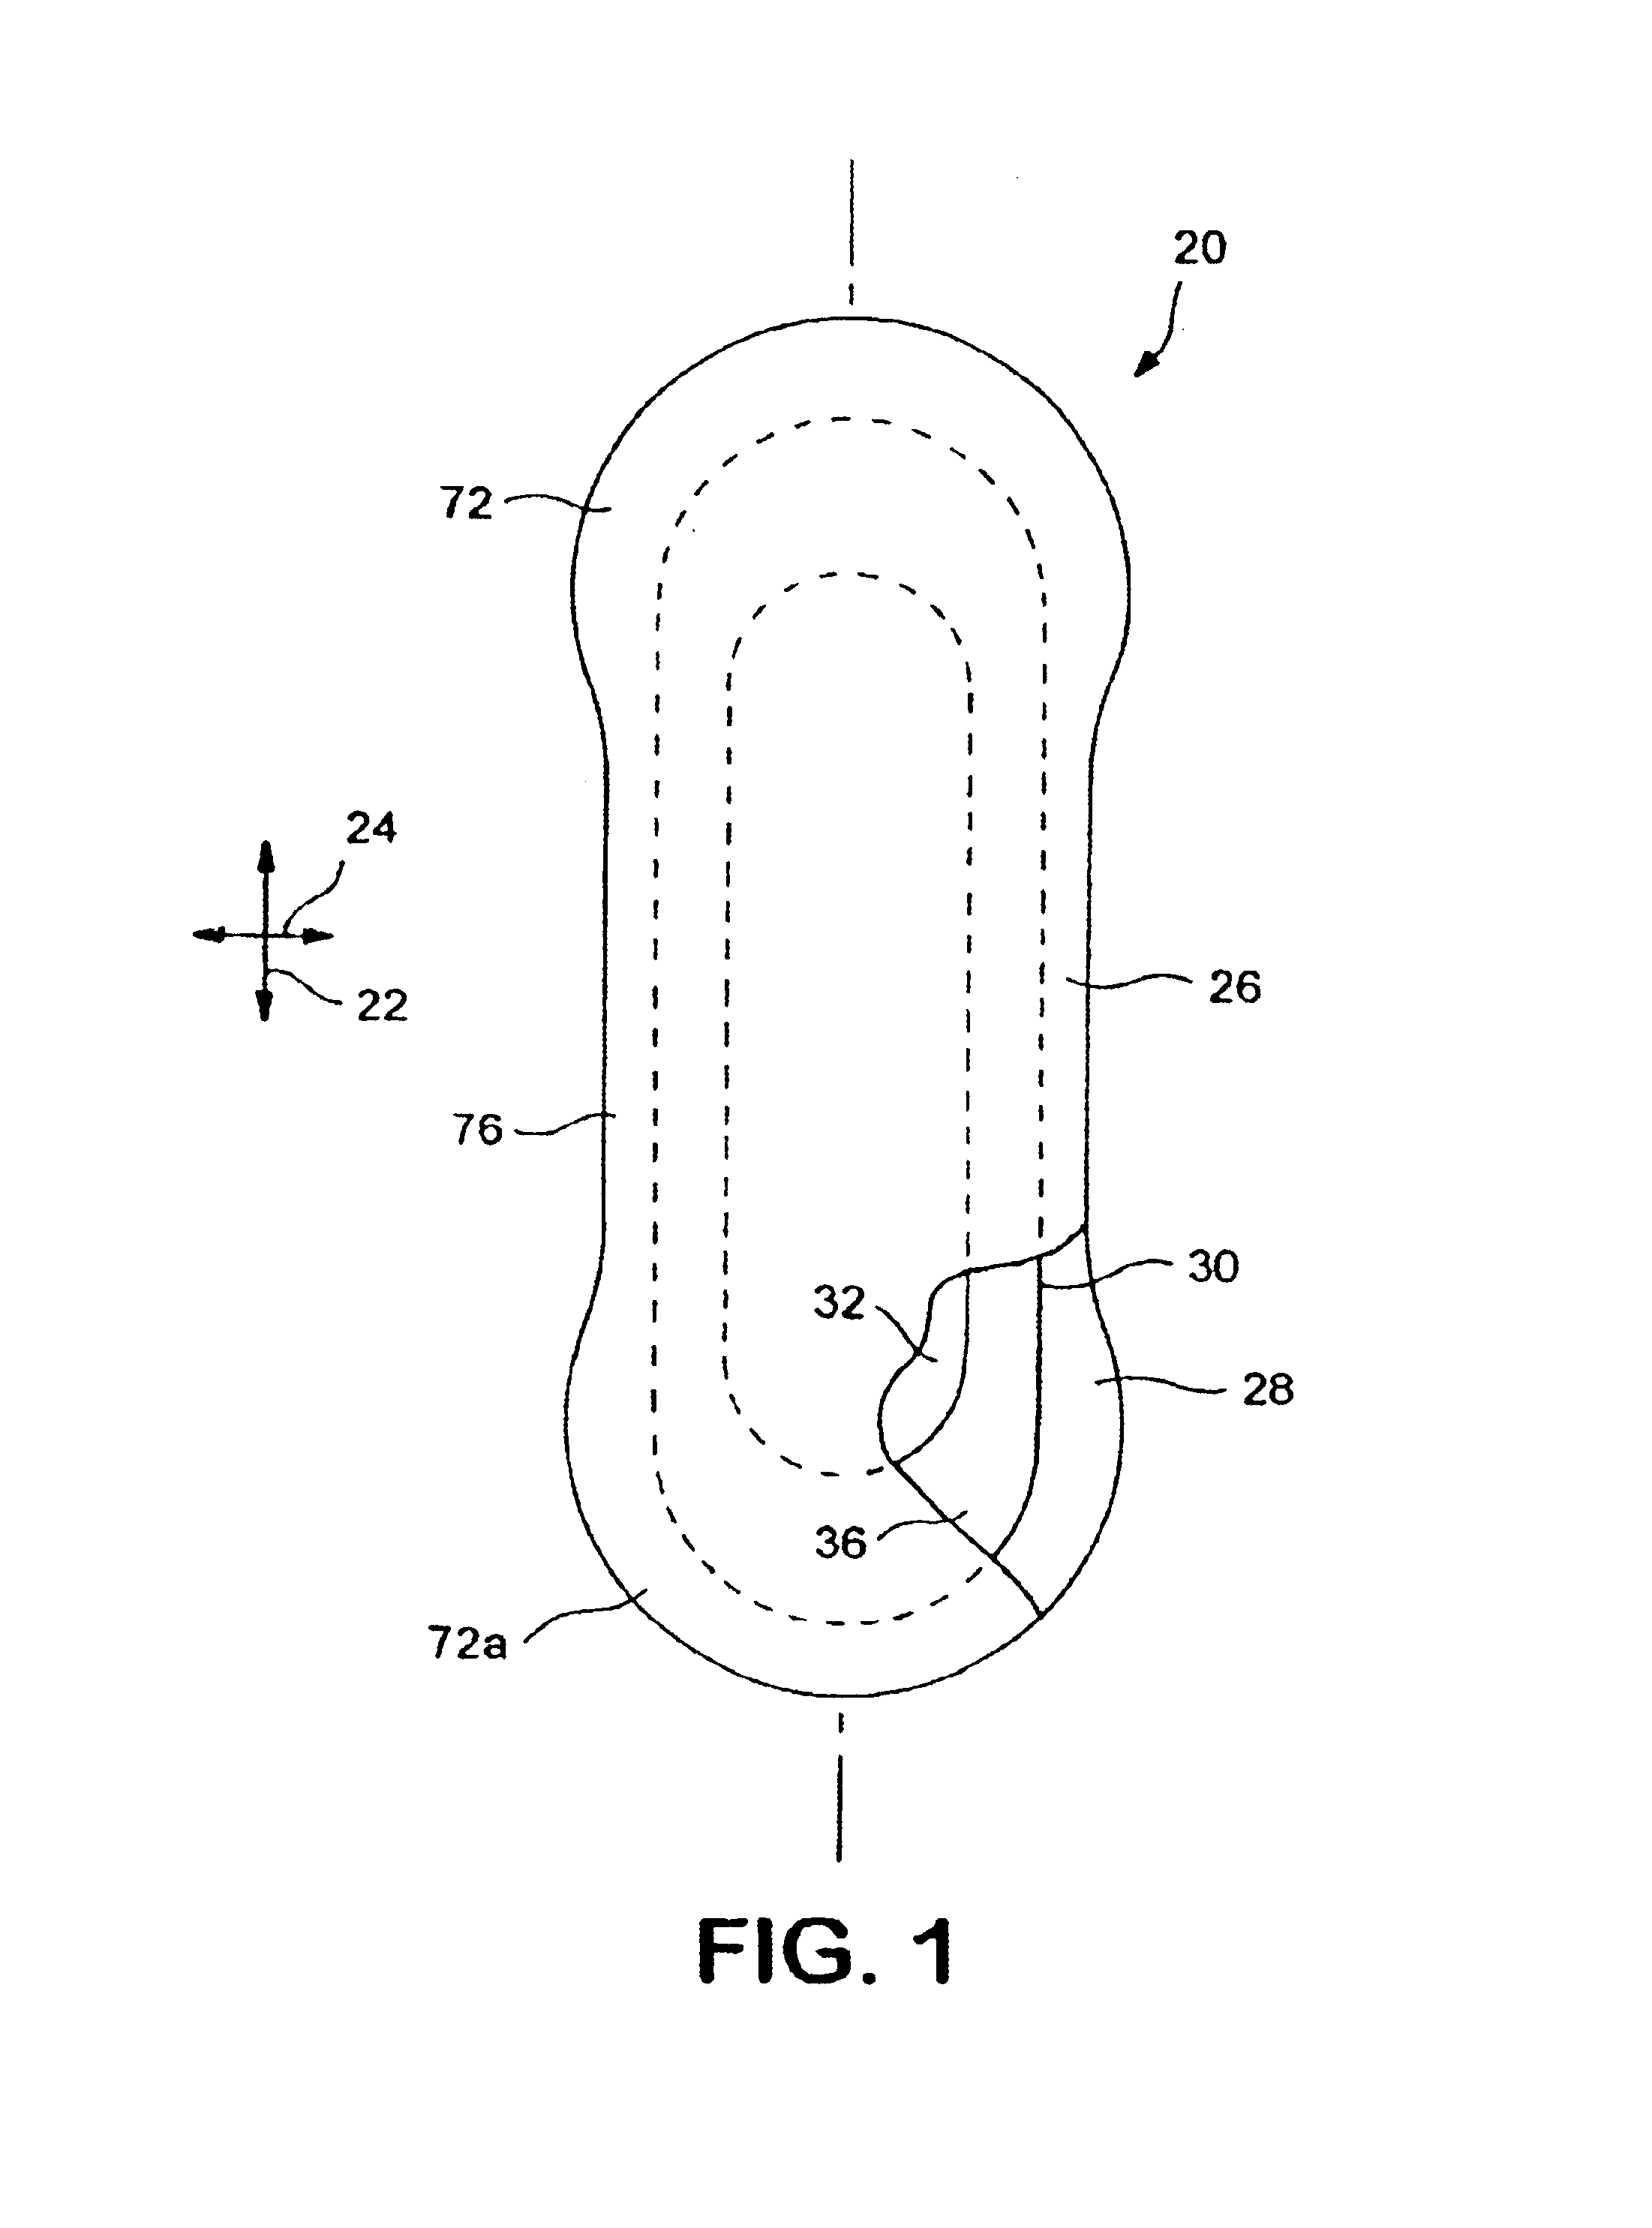 Absorbent structures with selectively placed flexible absorbent binder